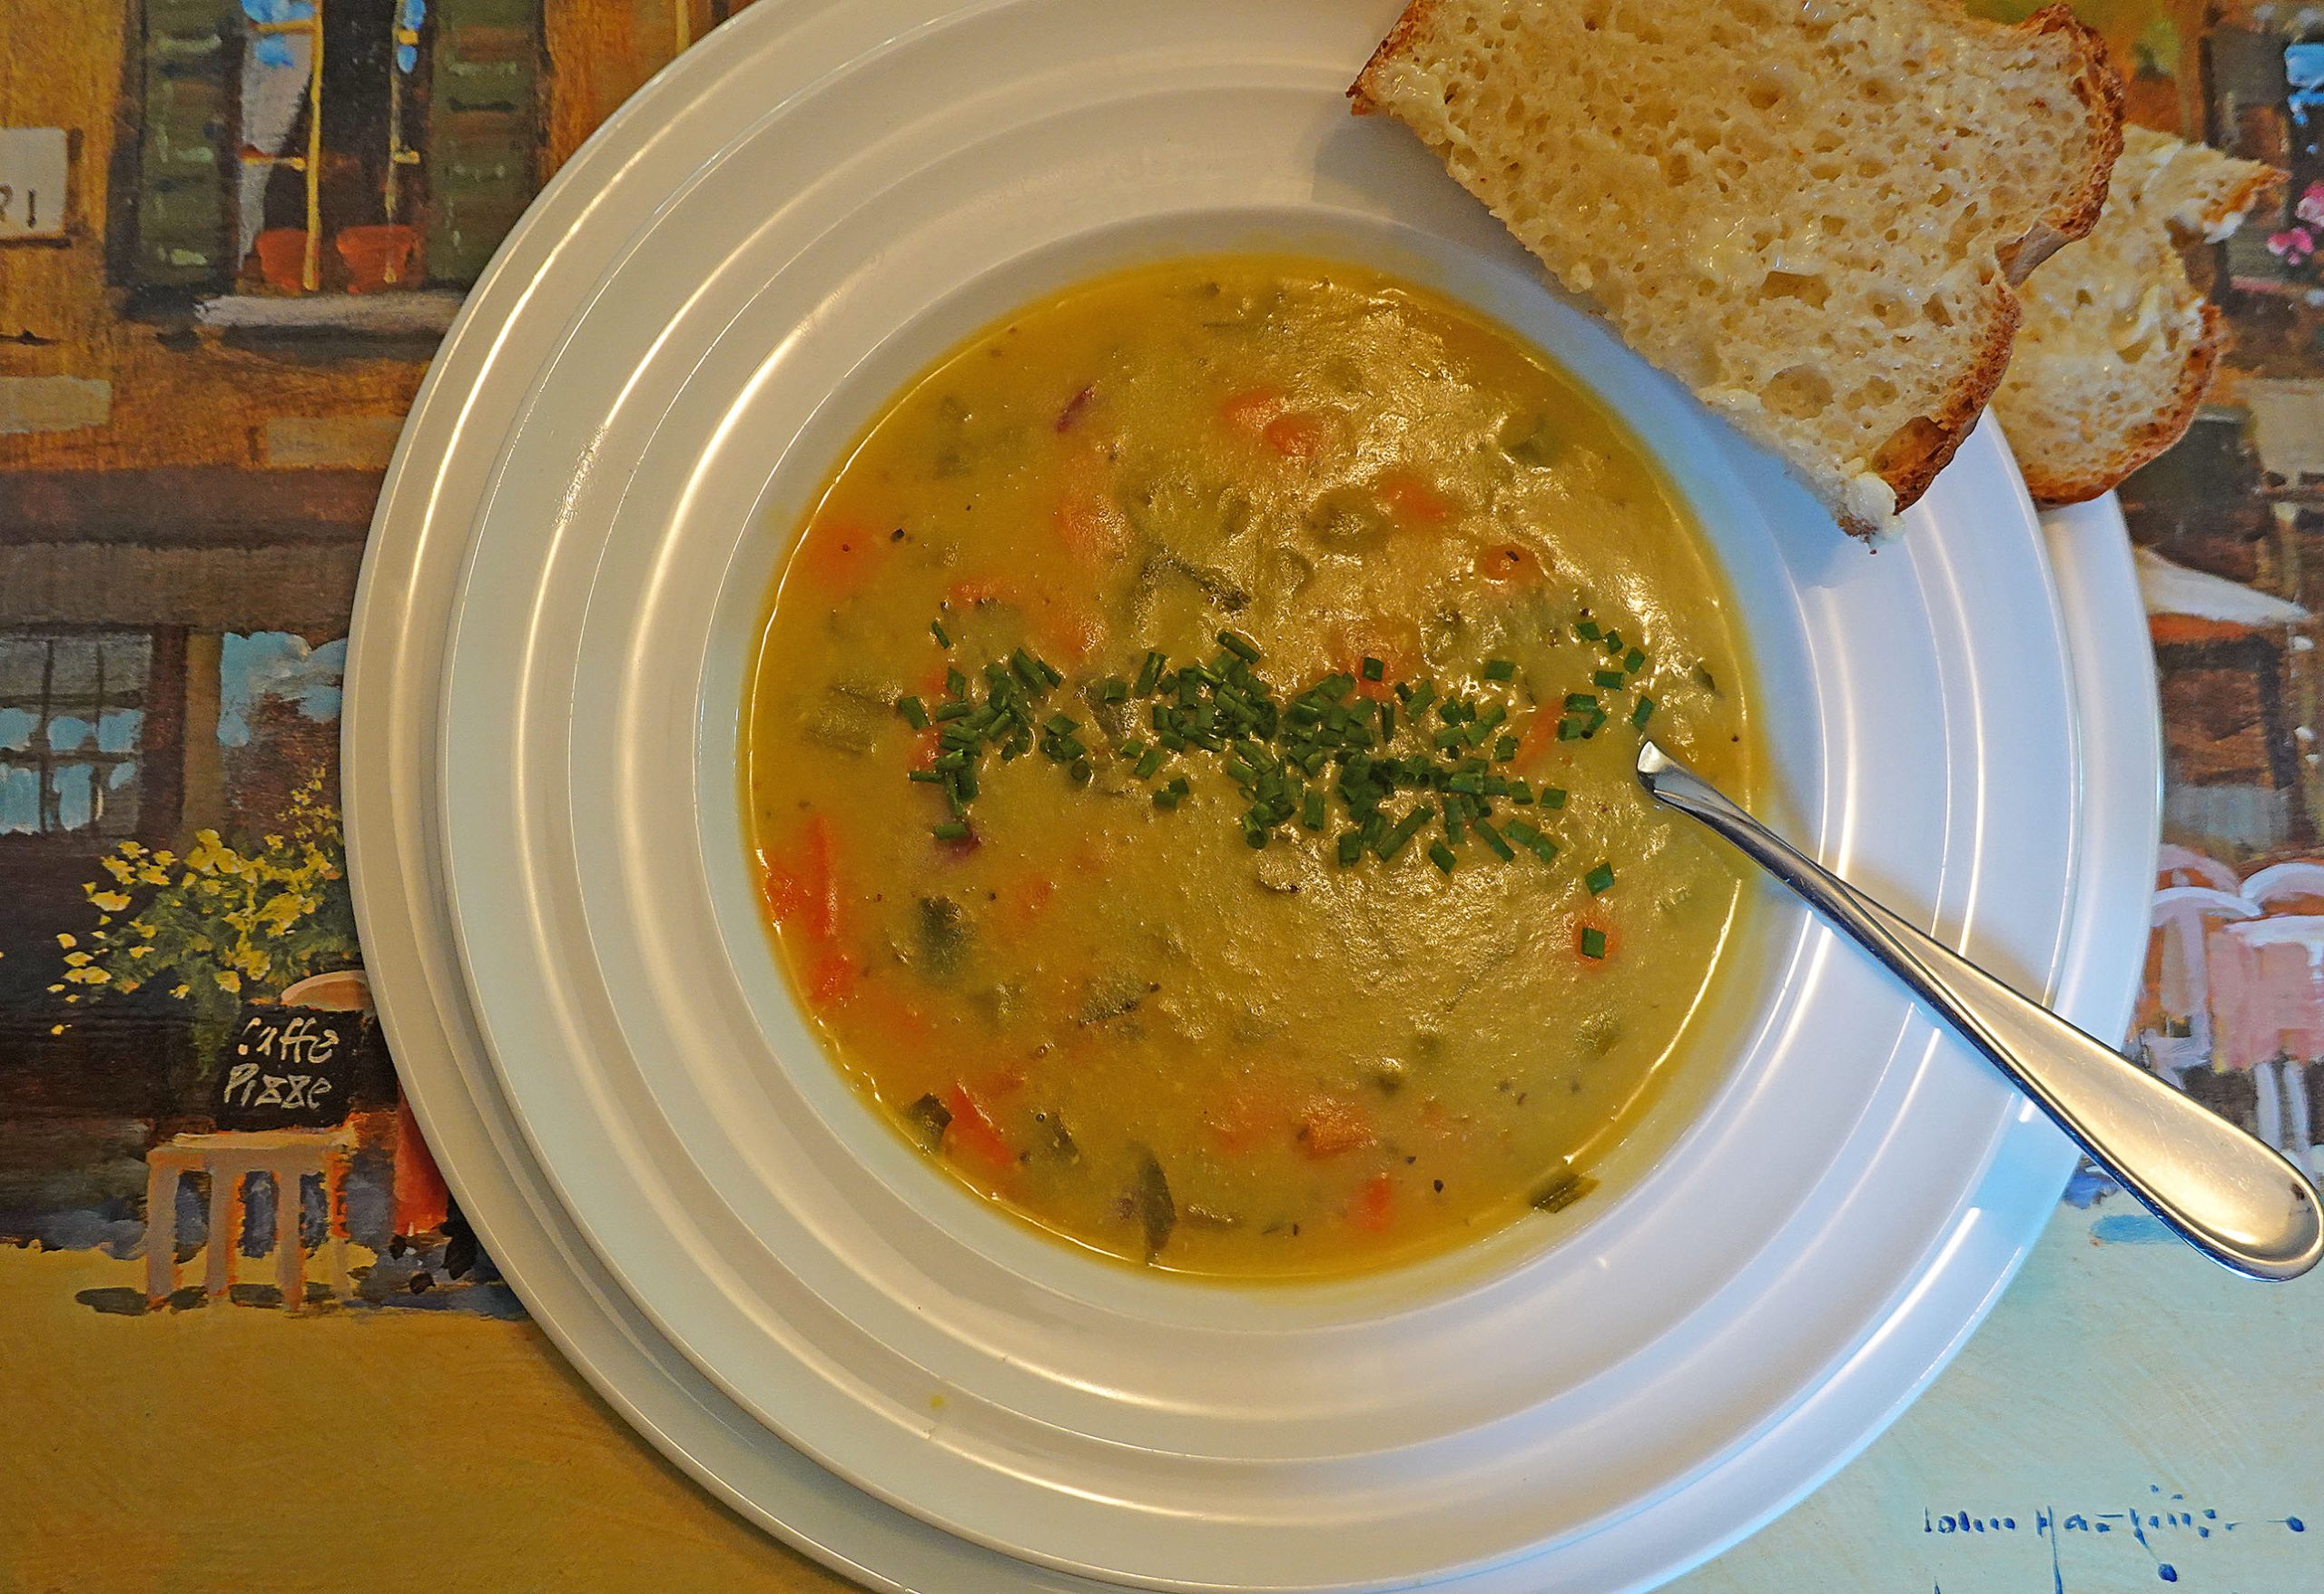 A bowl of white bean soup, garnished with parsley. A slice of whole wheat bread sits on the rim of the soup bowl.